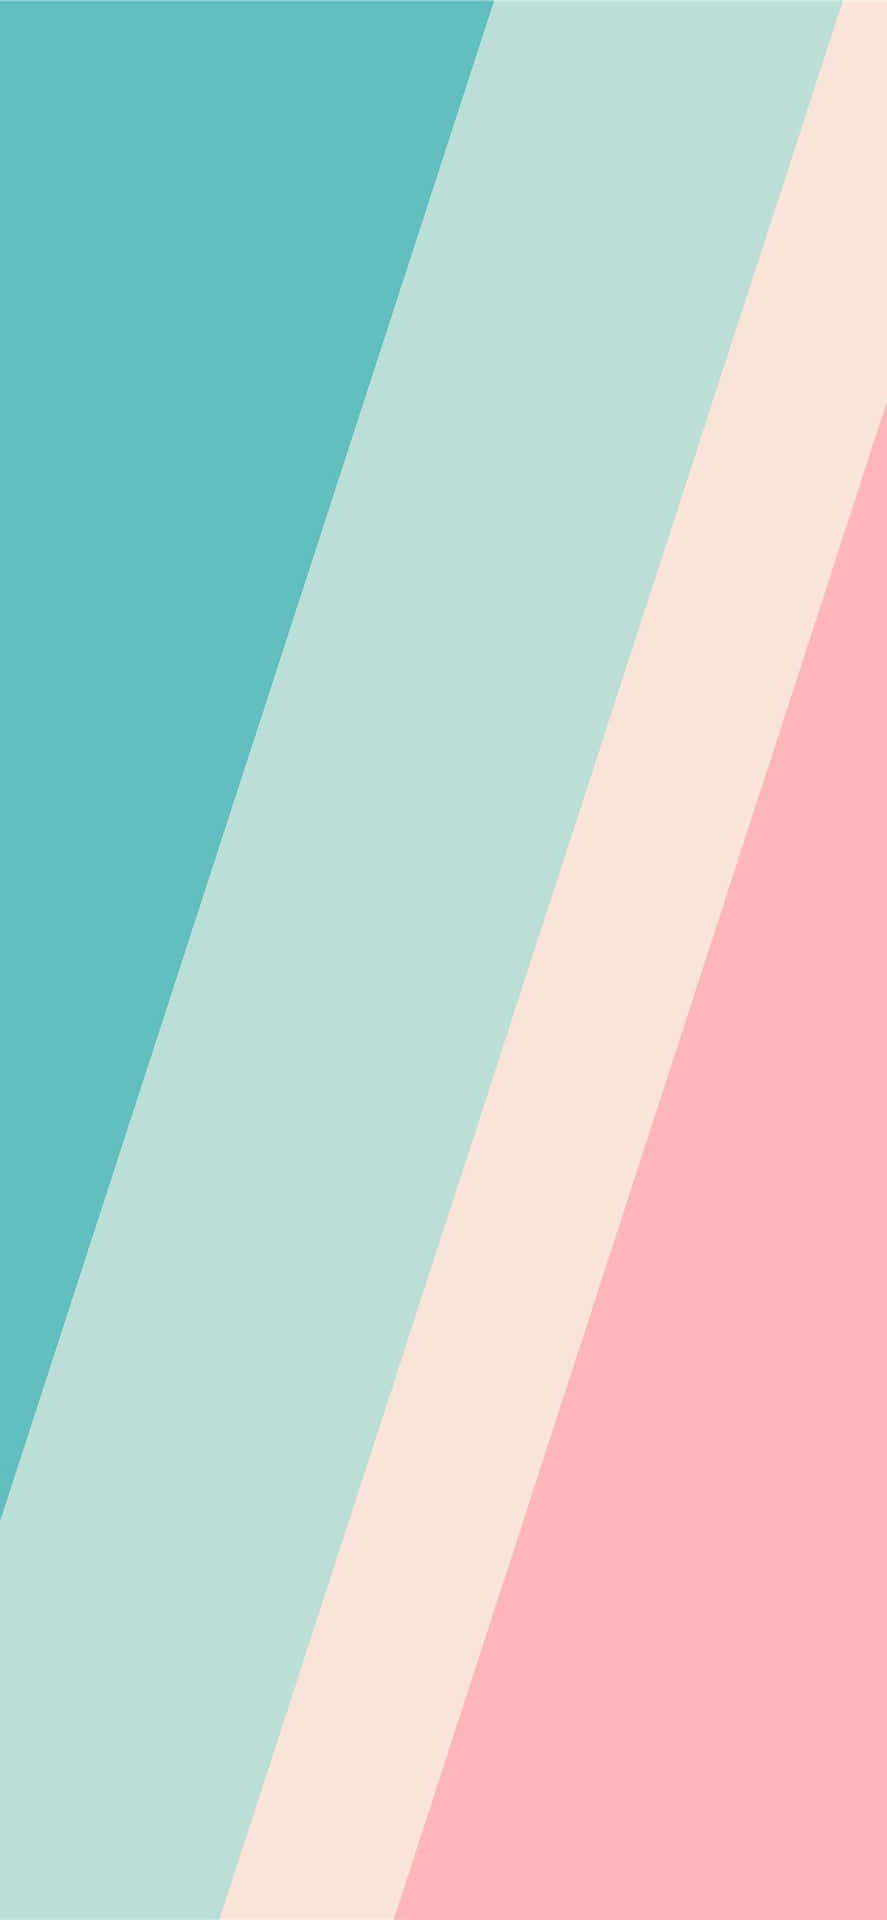 Immersive Teal Colored Background